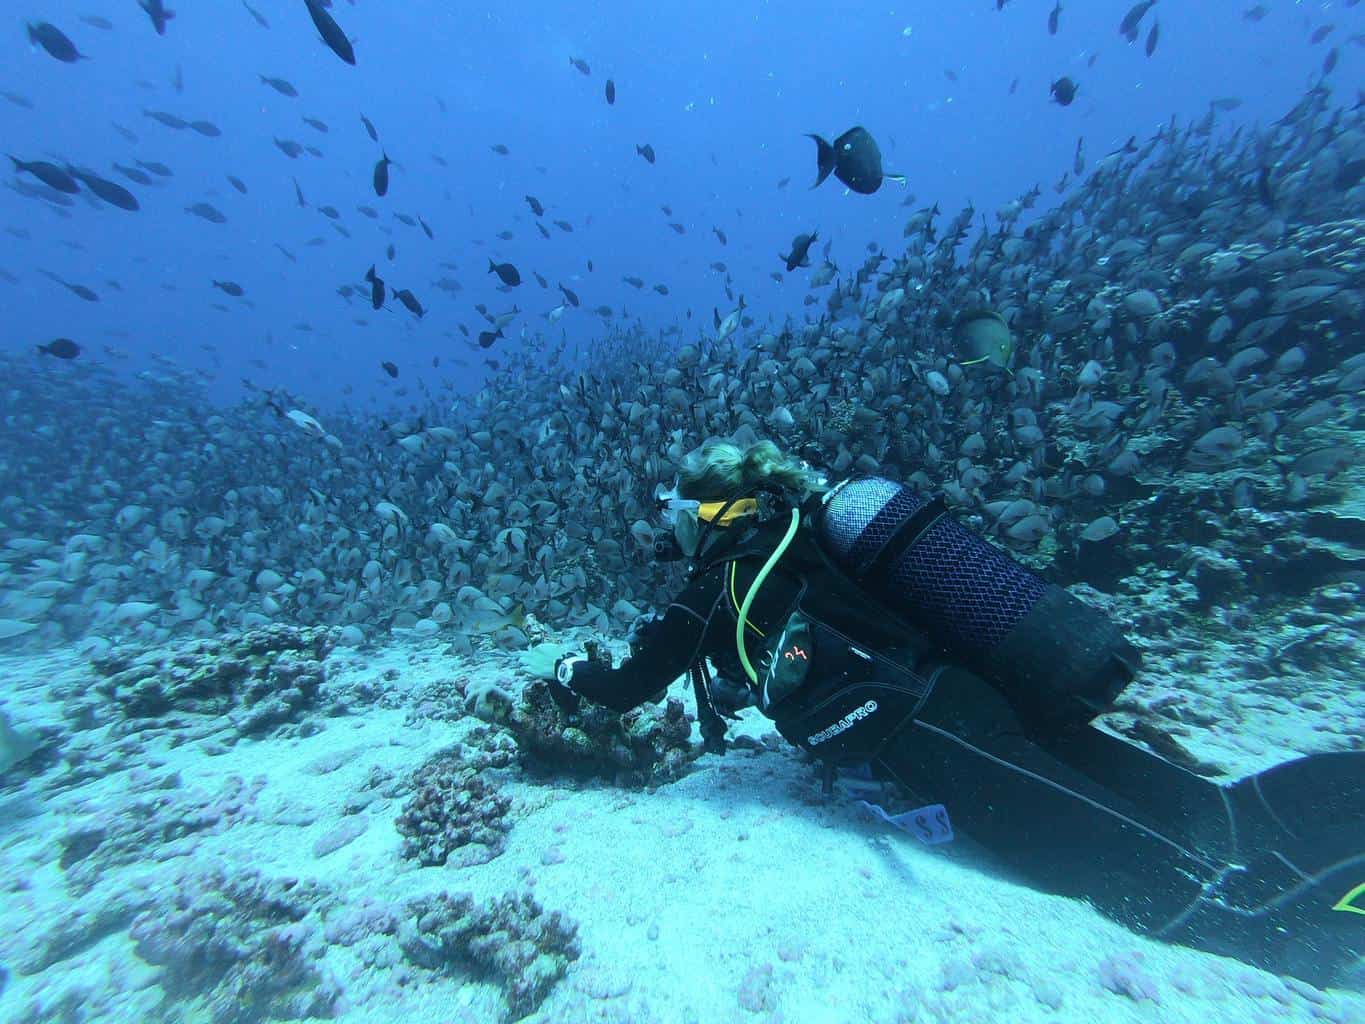 10 Things Not to Do When Scuba Diving (Every Diver Should Know)